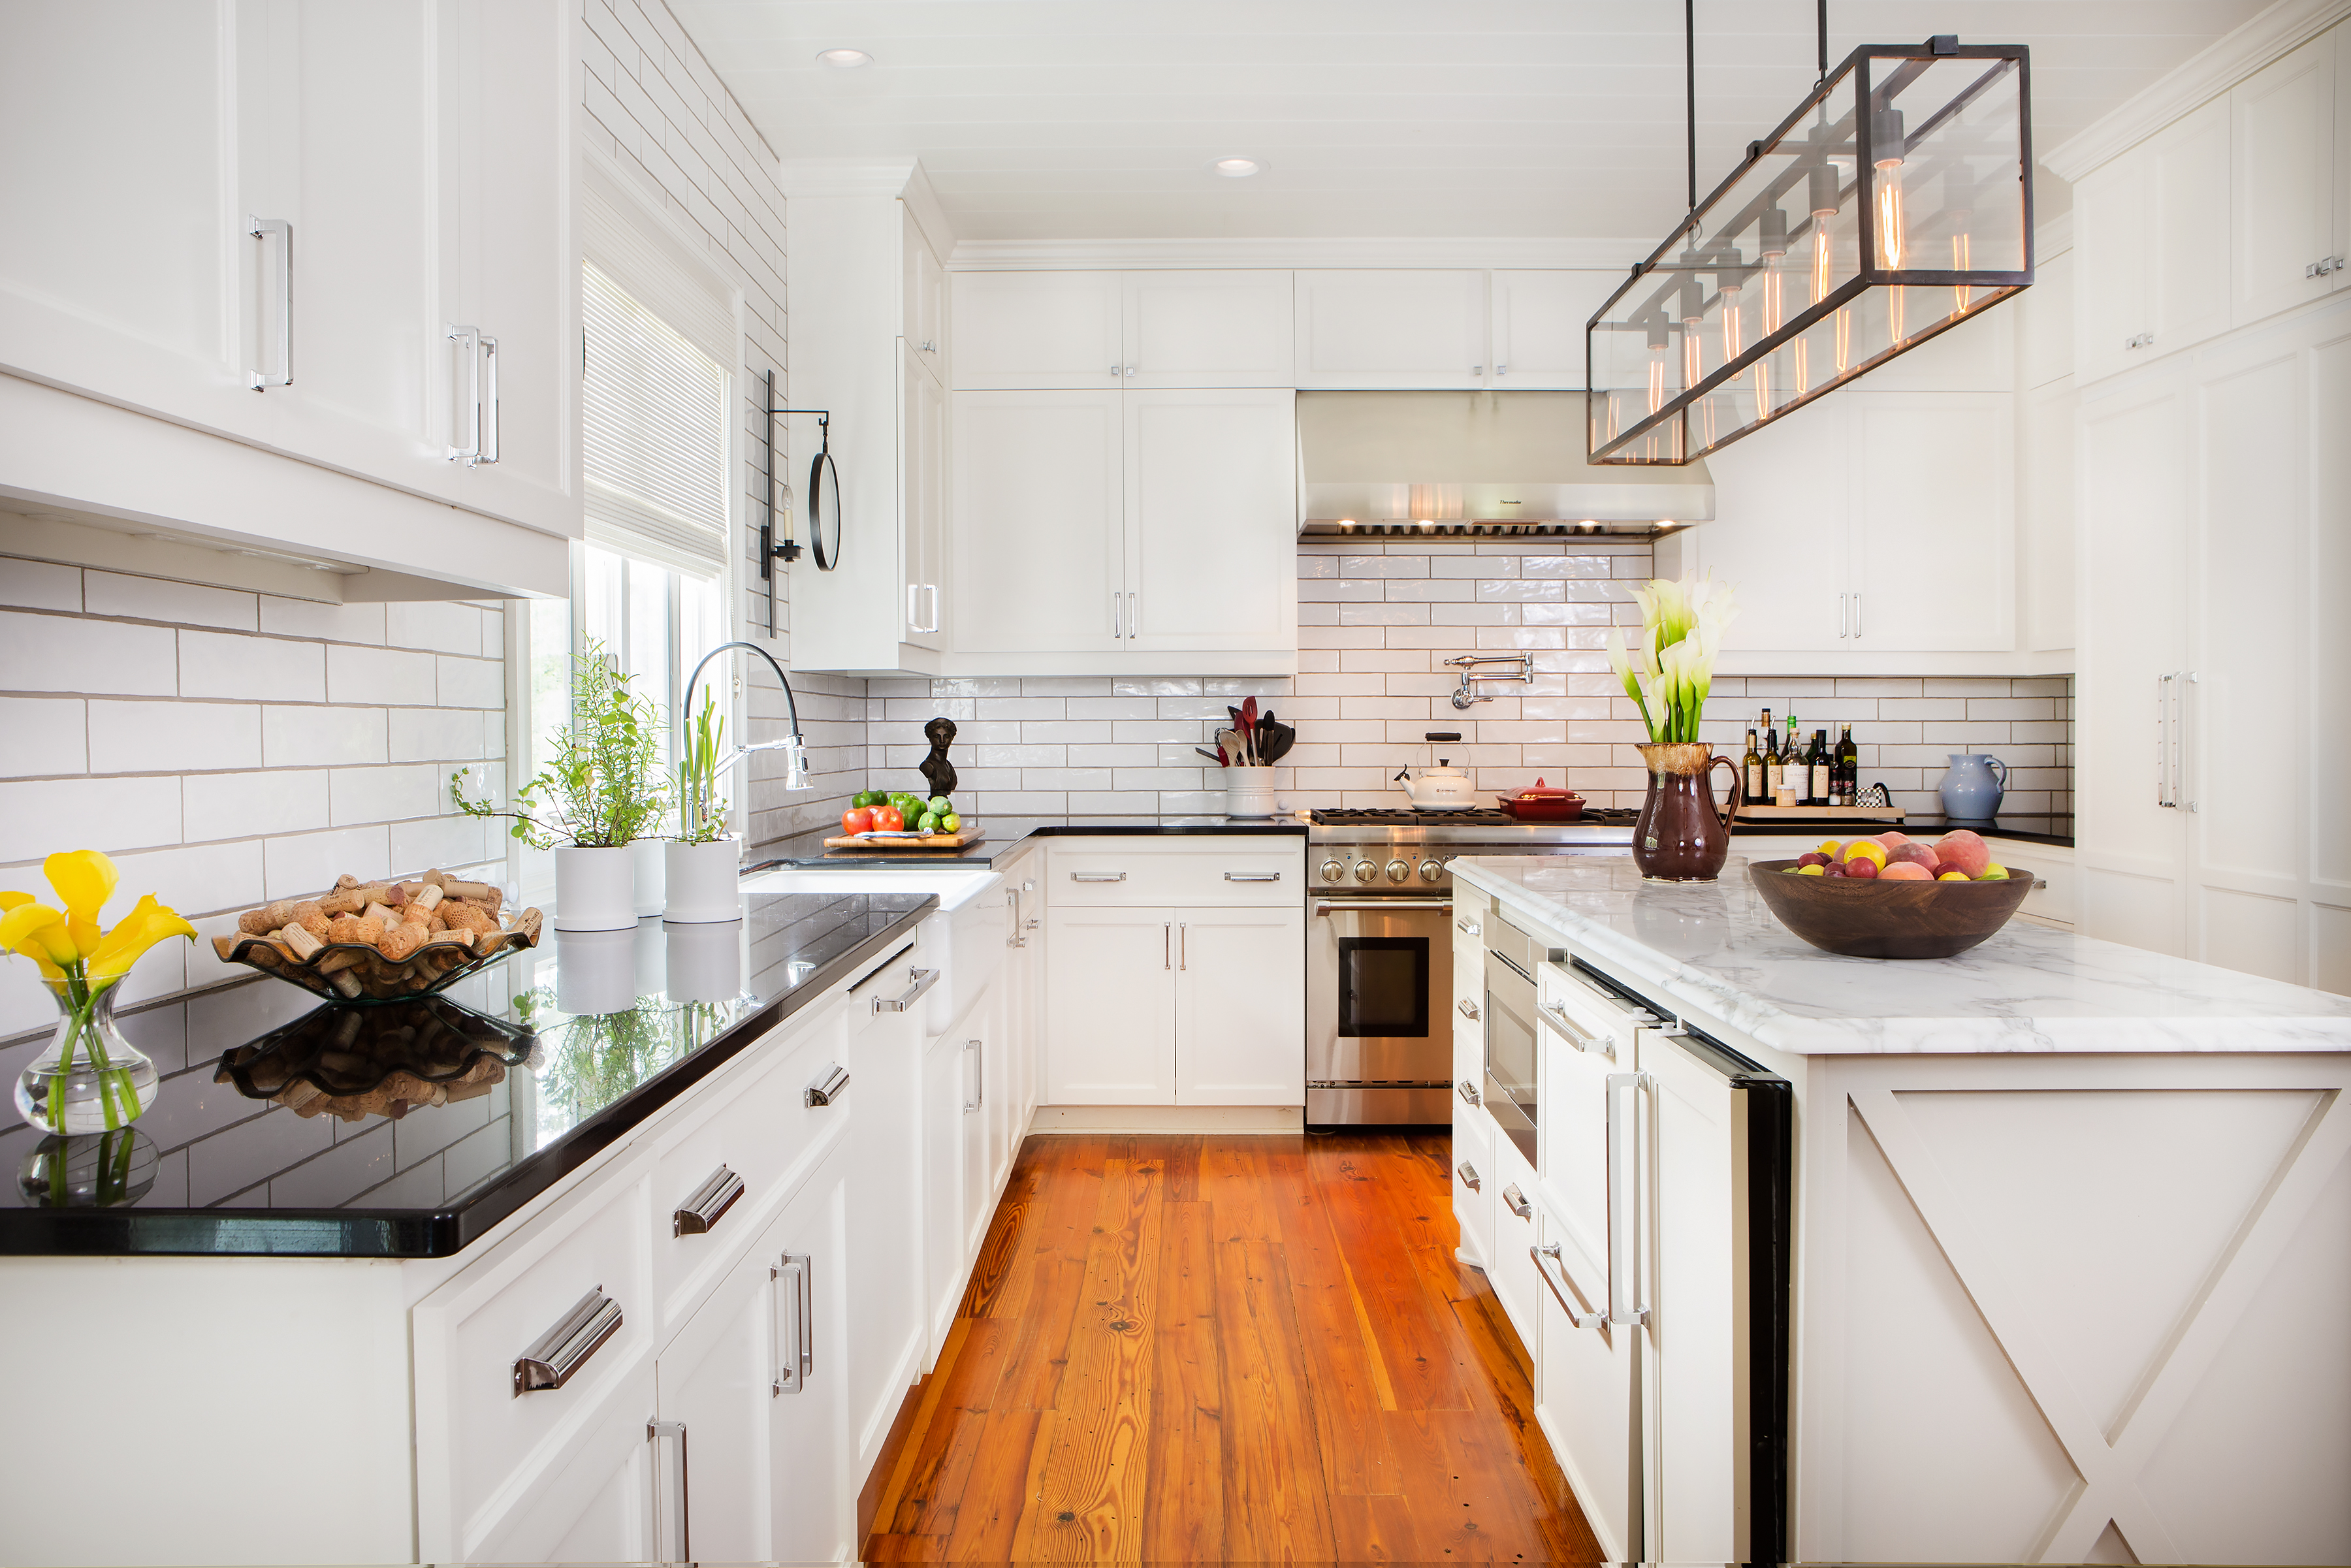 The kitchen area, open to the dining room and living area, shows the most significant changes. The symmetrical plan of white cabinets, chrome fixtures, and crisp lines make it Juleah’s favorite room in the house. 